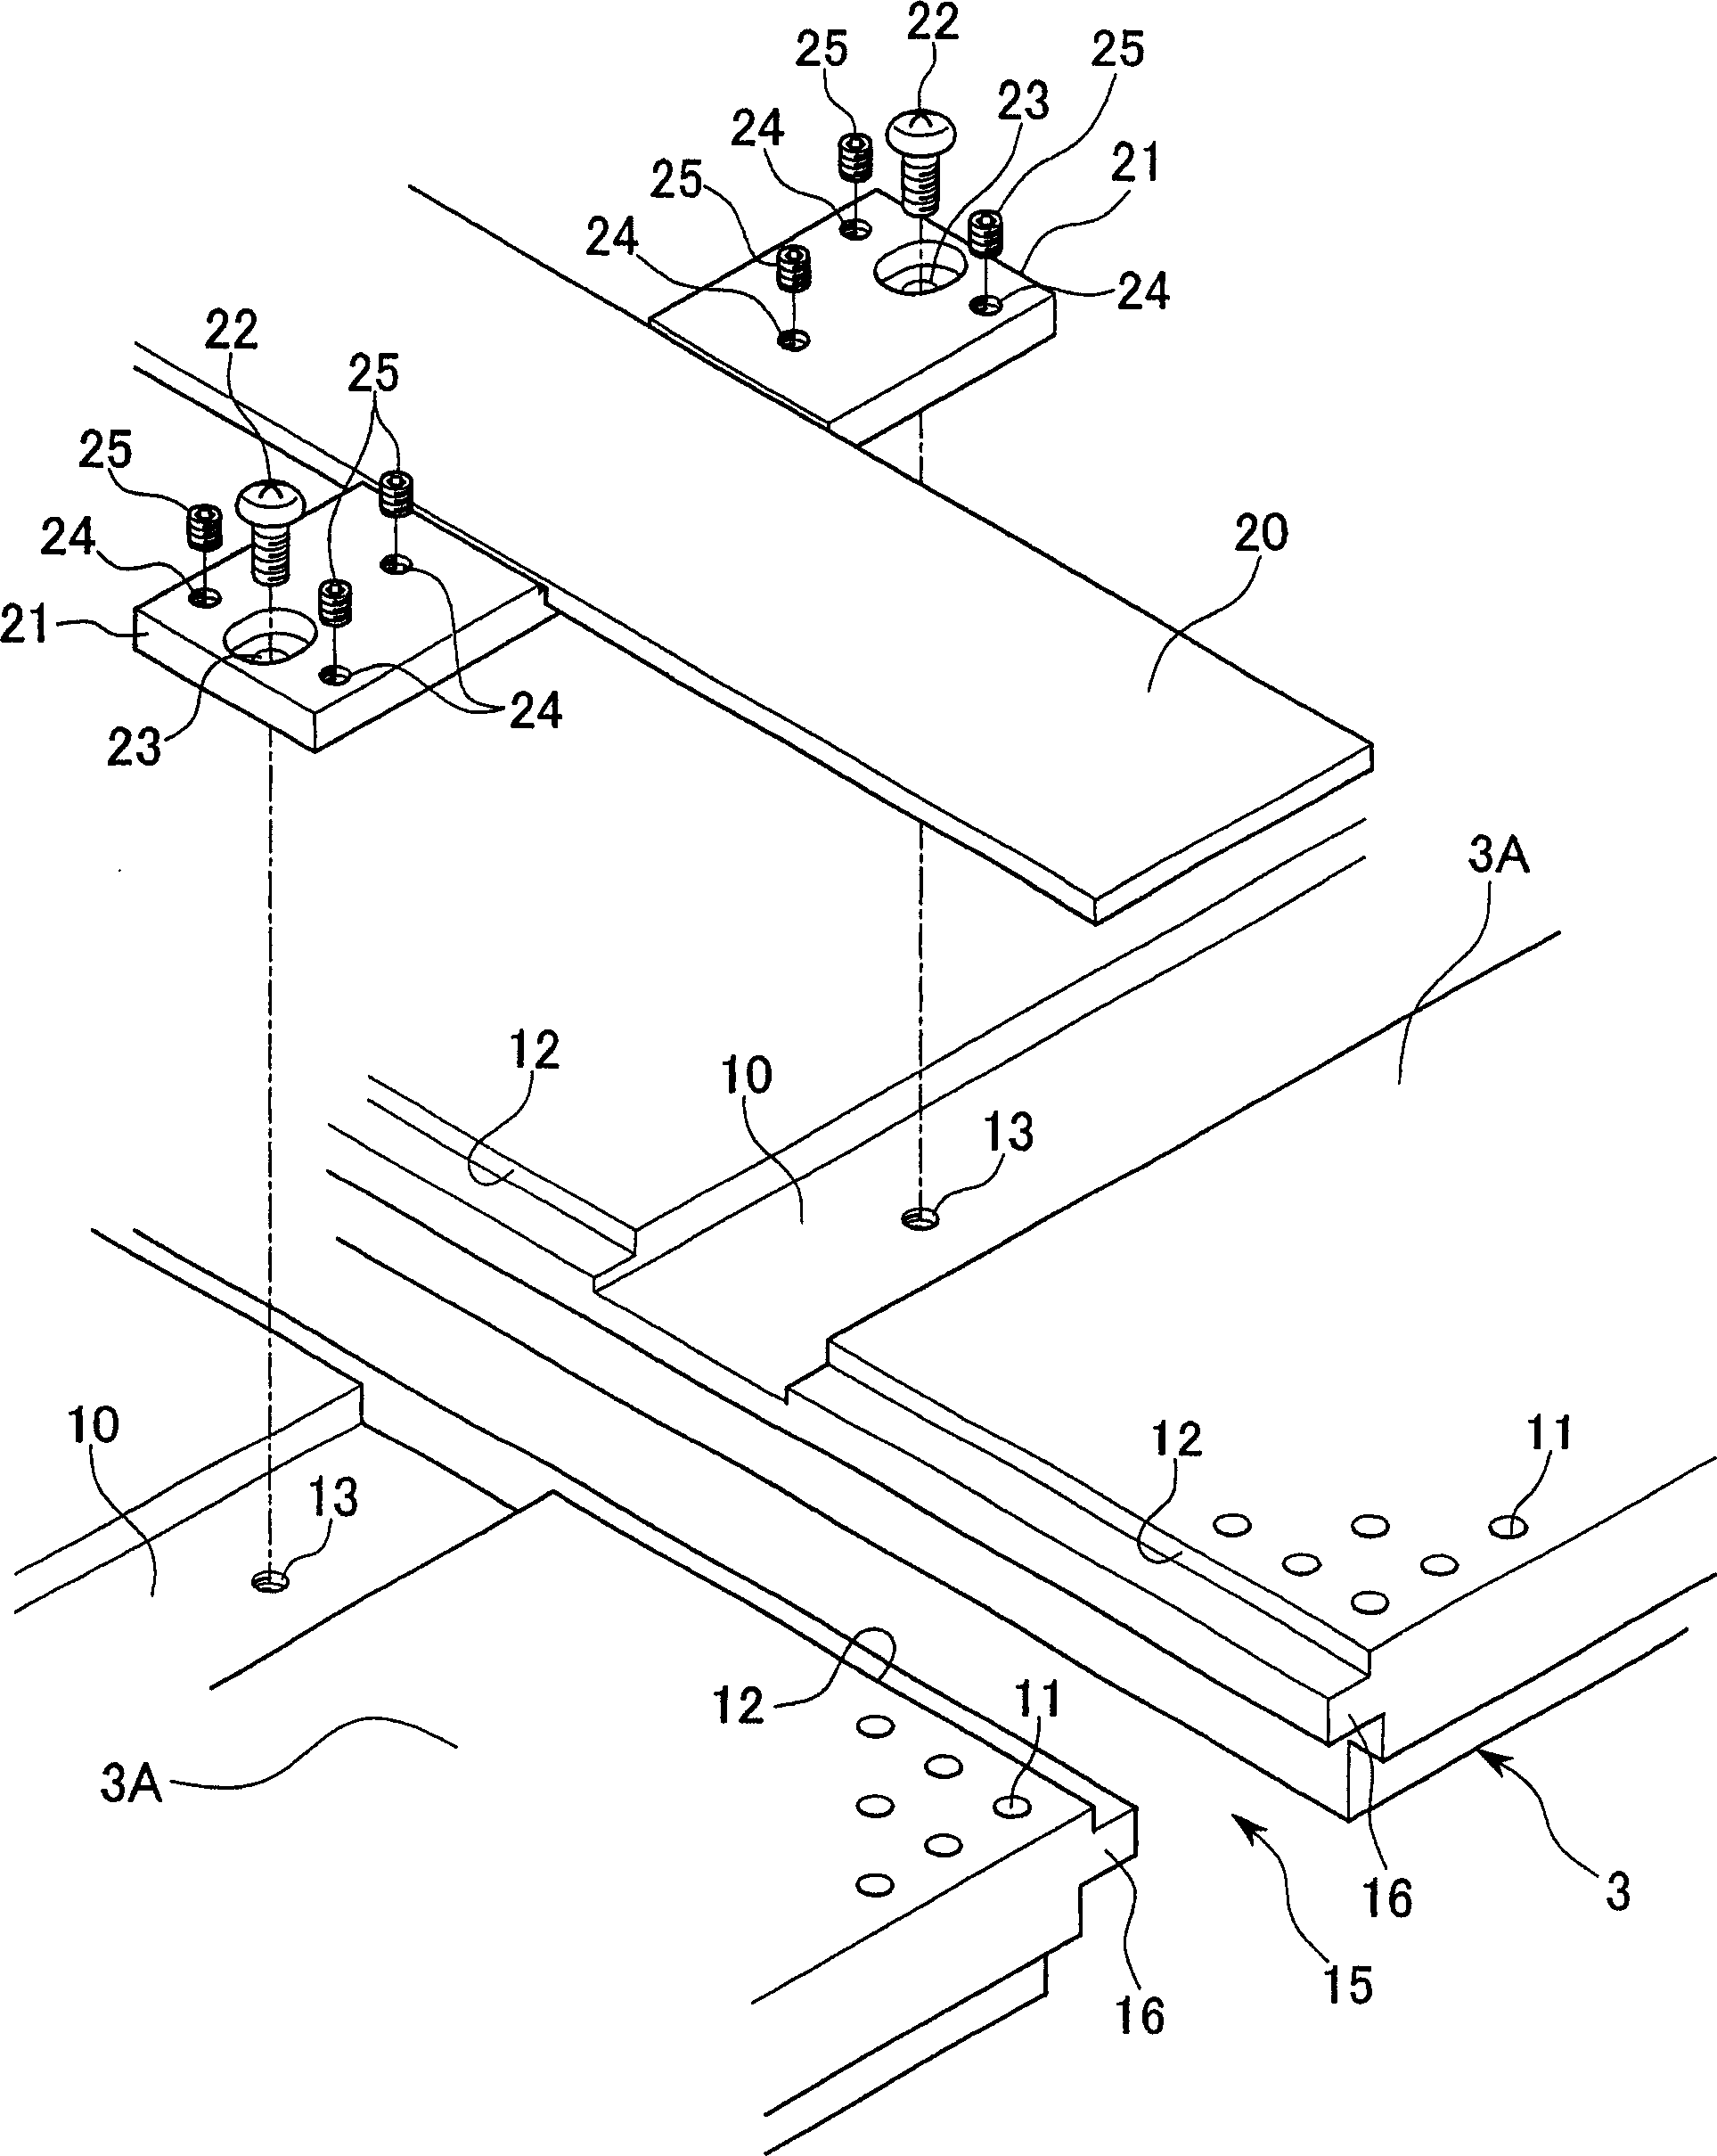 Substrate checking device